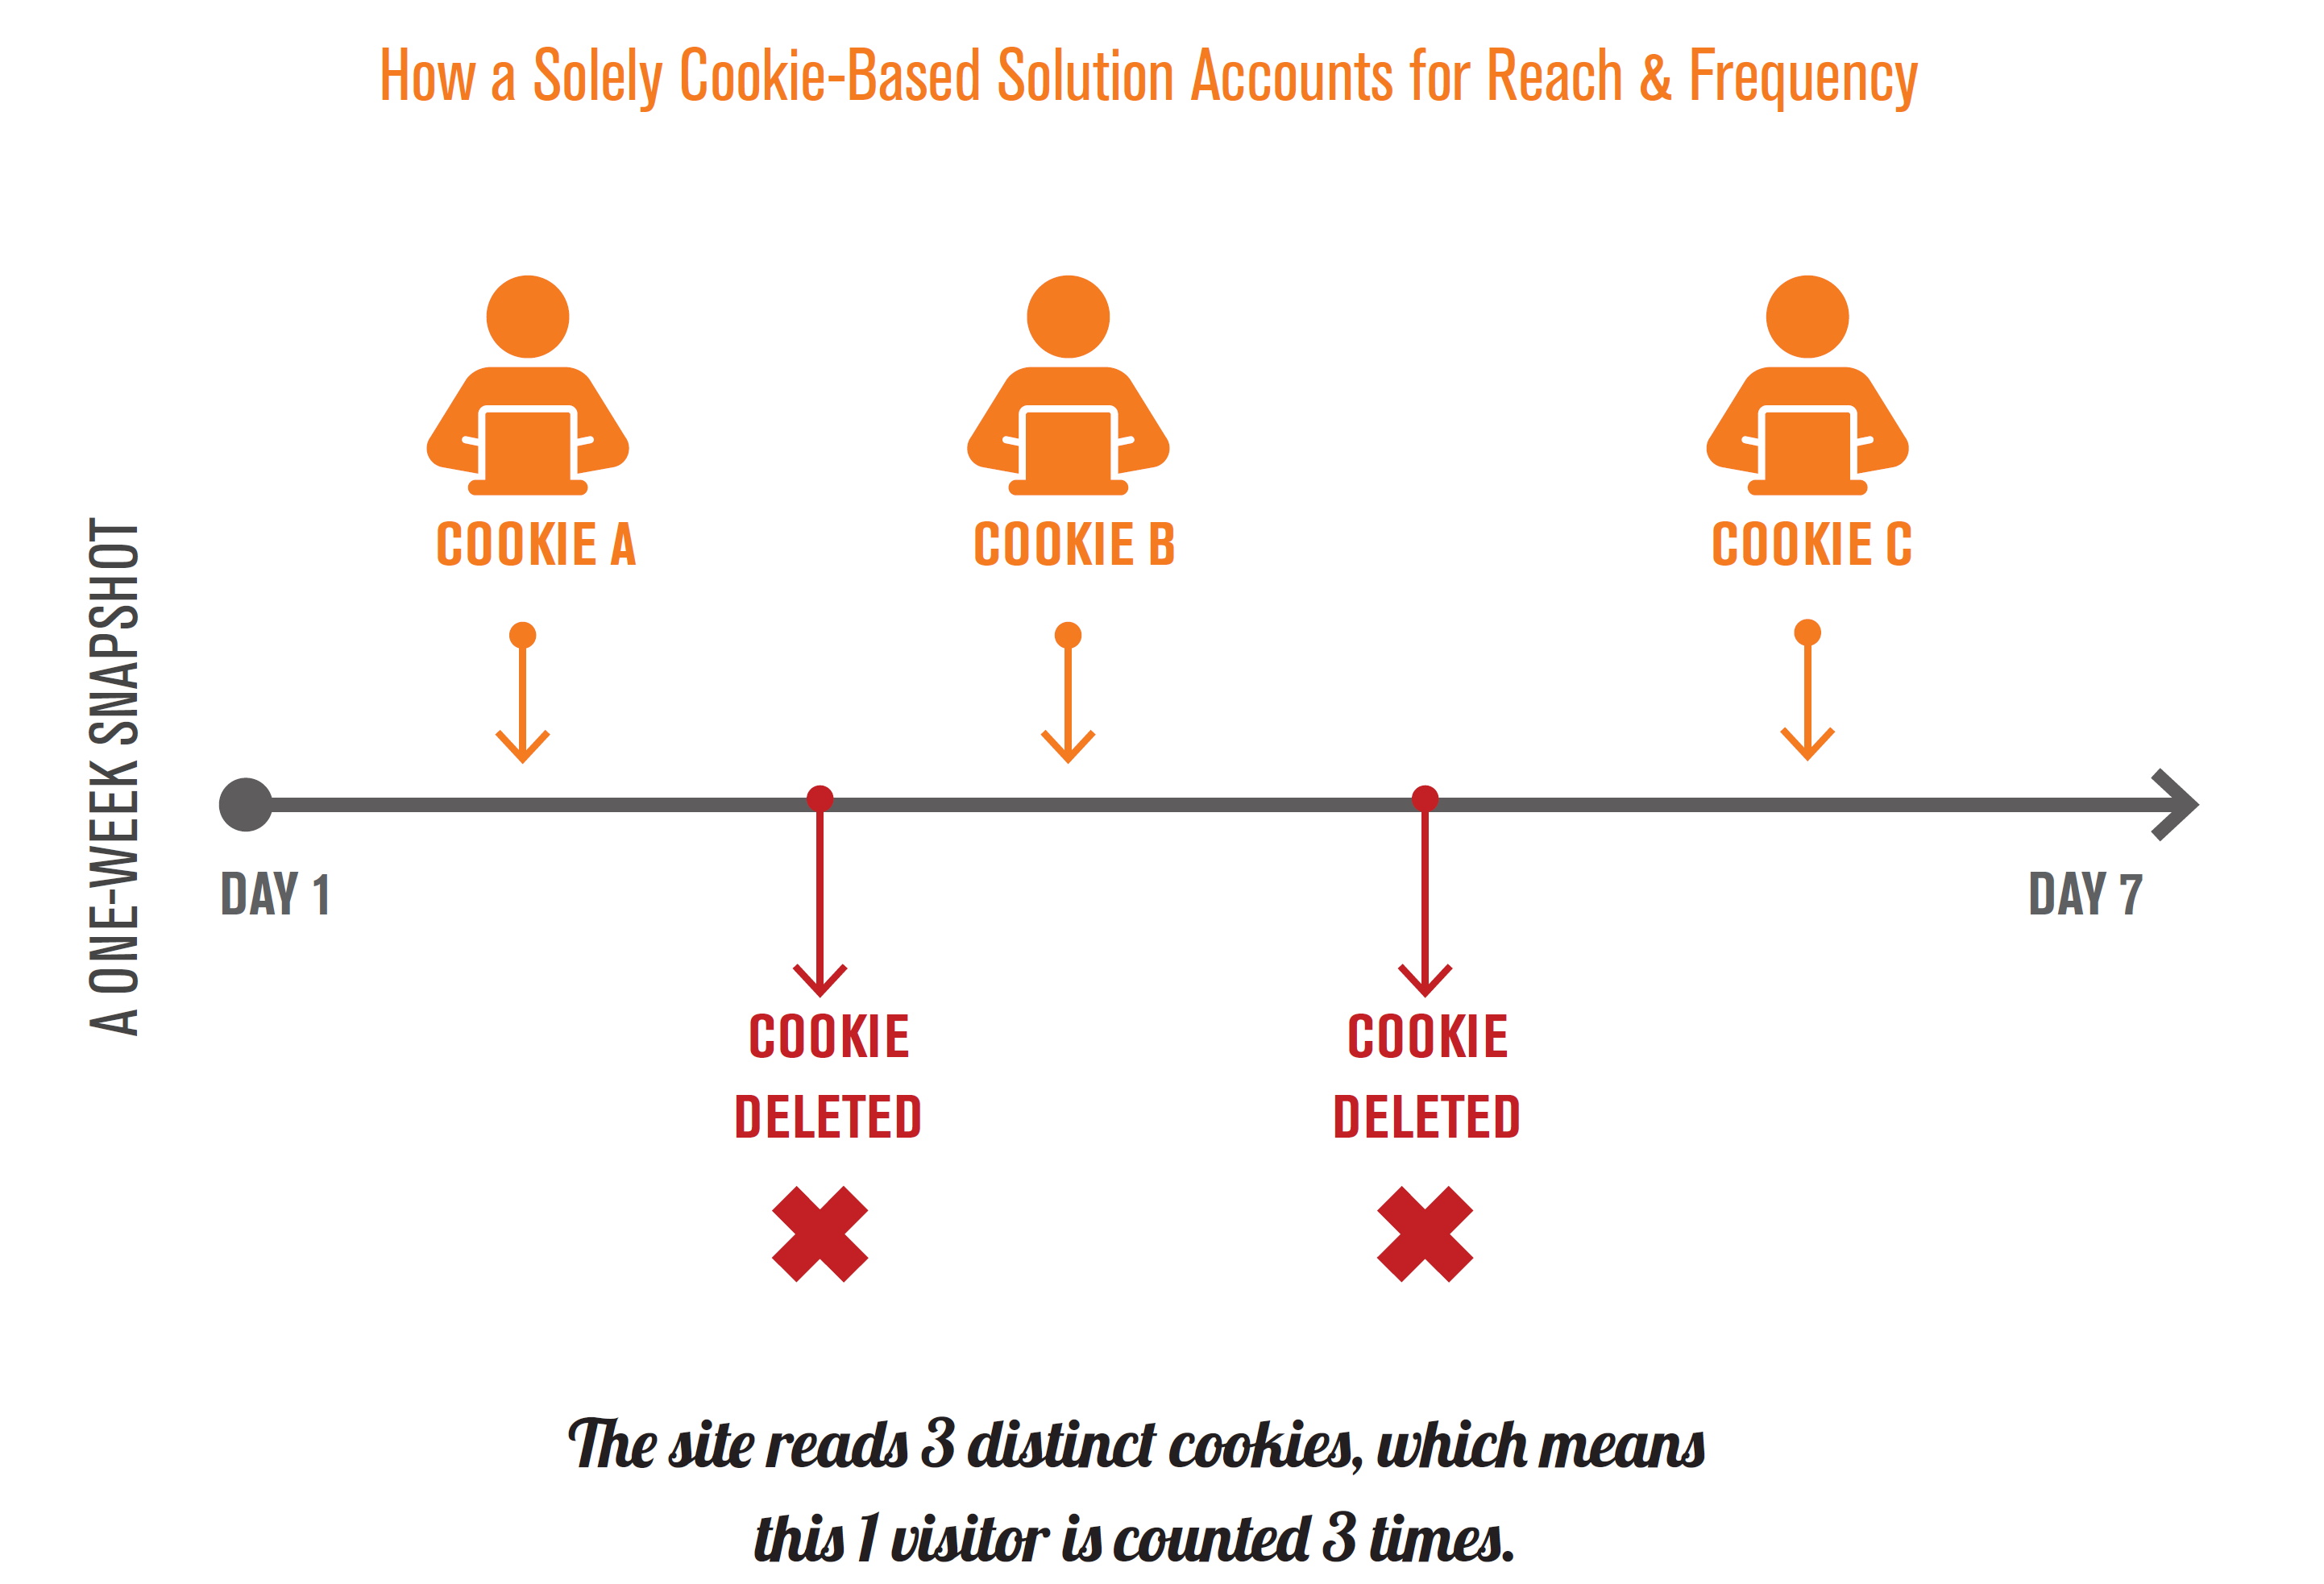 Drawbacks of using Cookies for Tracking Users. Deletion of cookies inflates user count